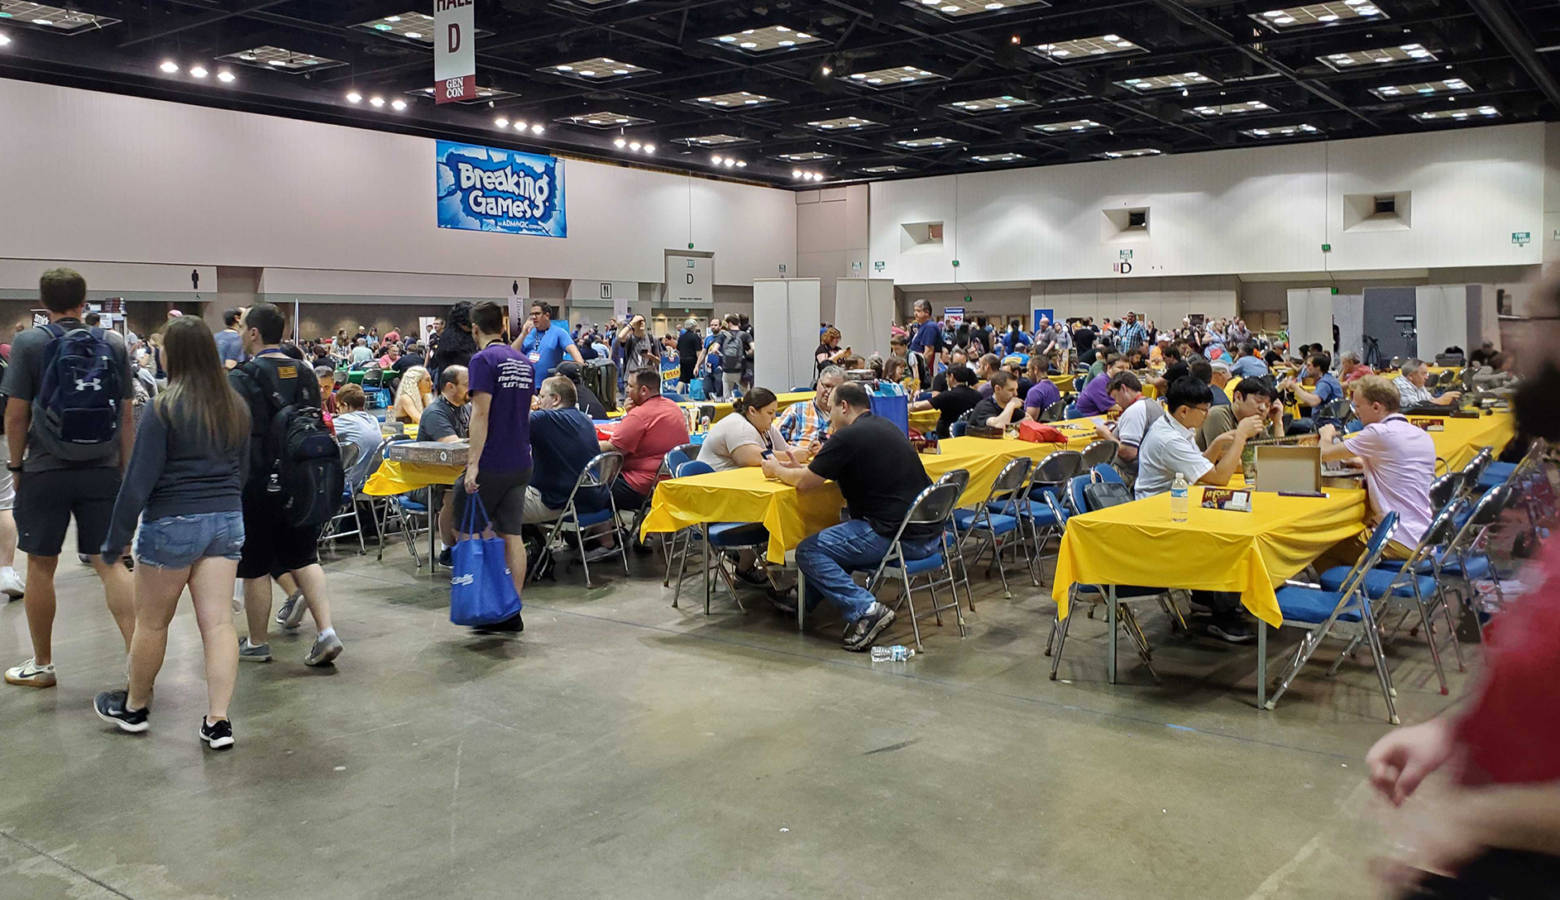 Attendees play games at the 2019 Gen Con in Indianapolis Saturday afternoon. (Samantha Horton/IPB News)